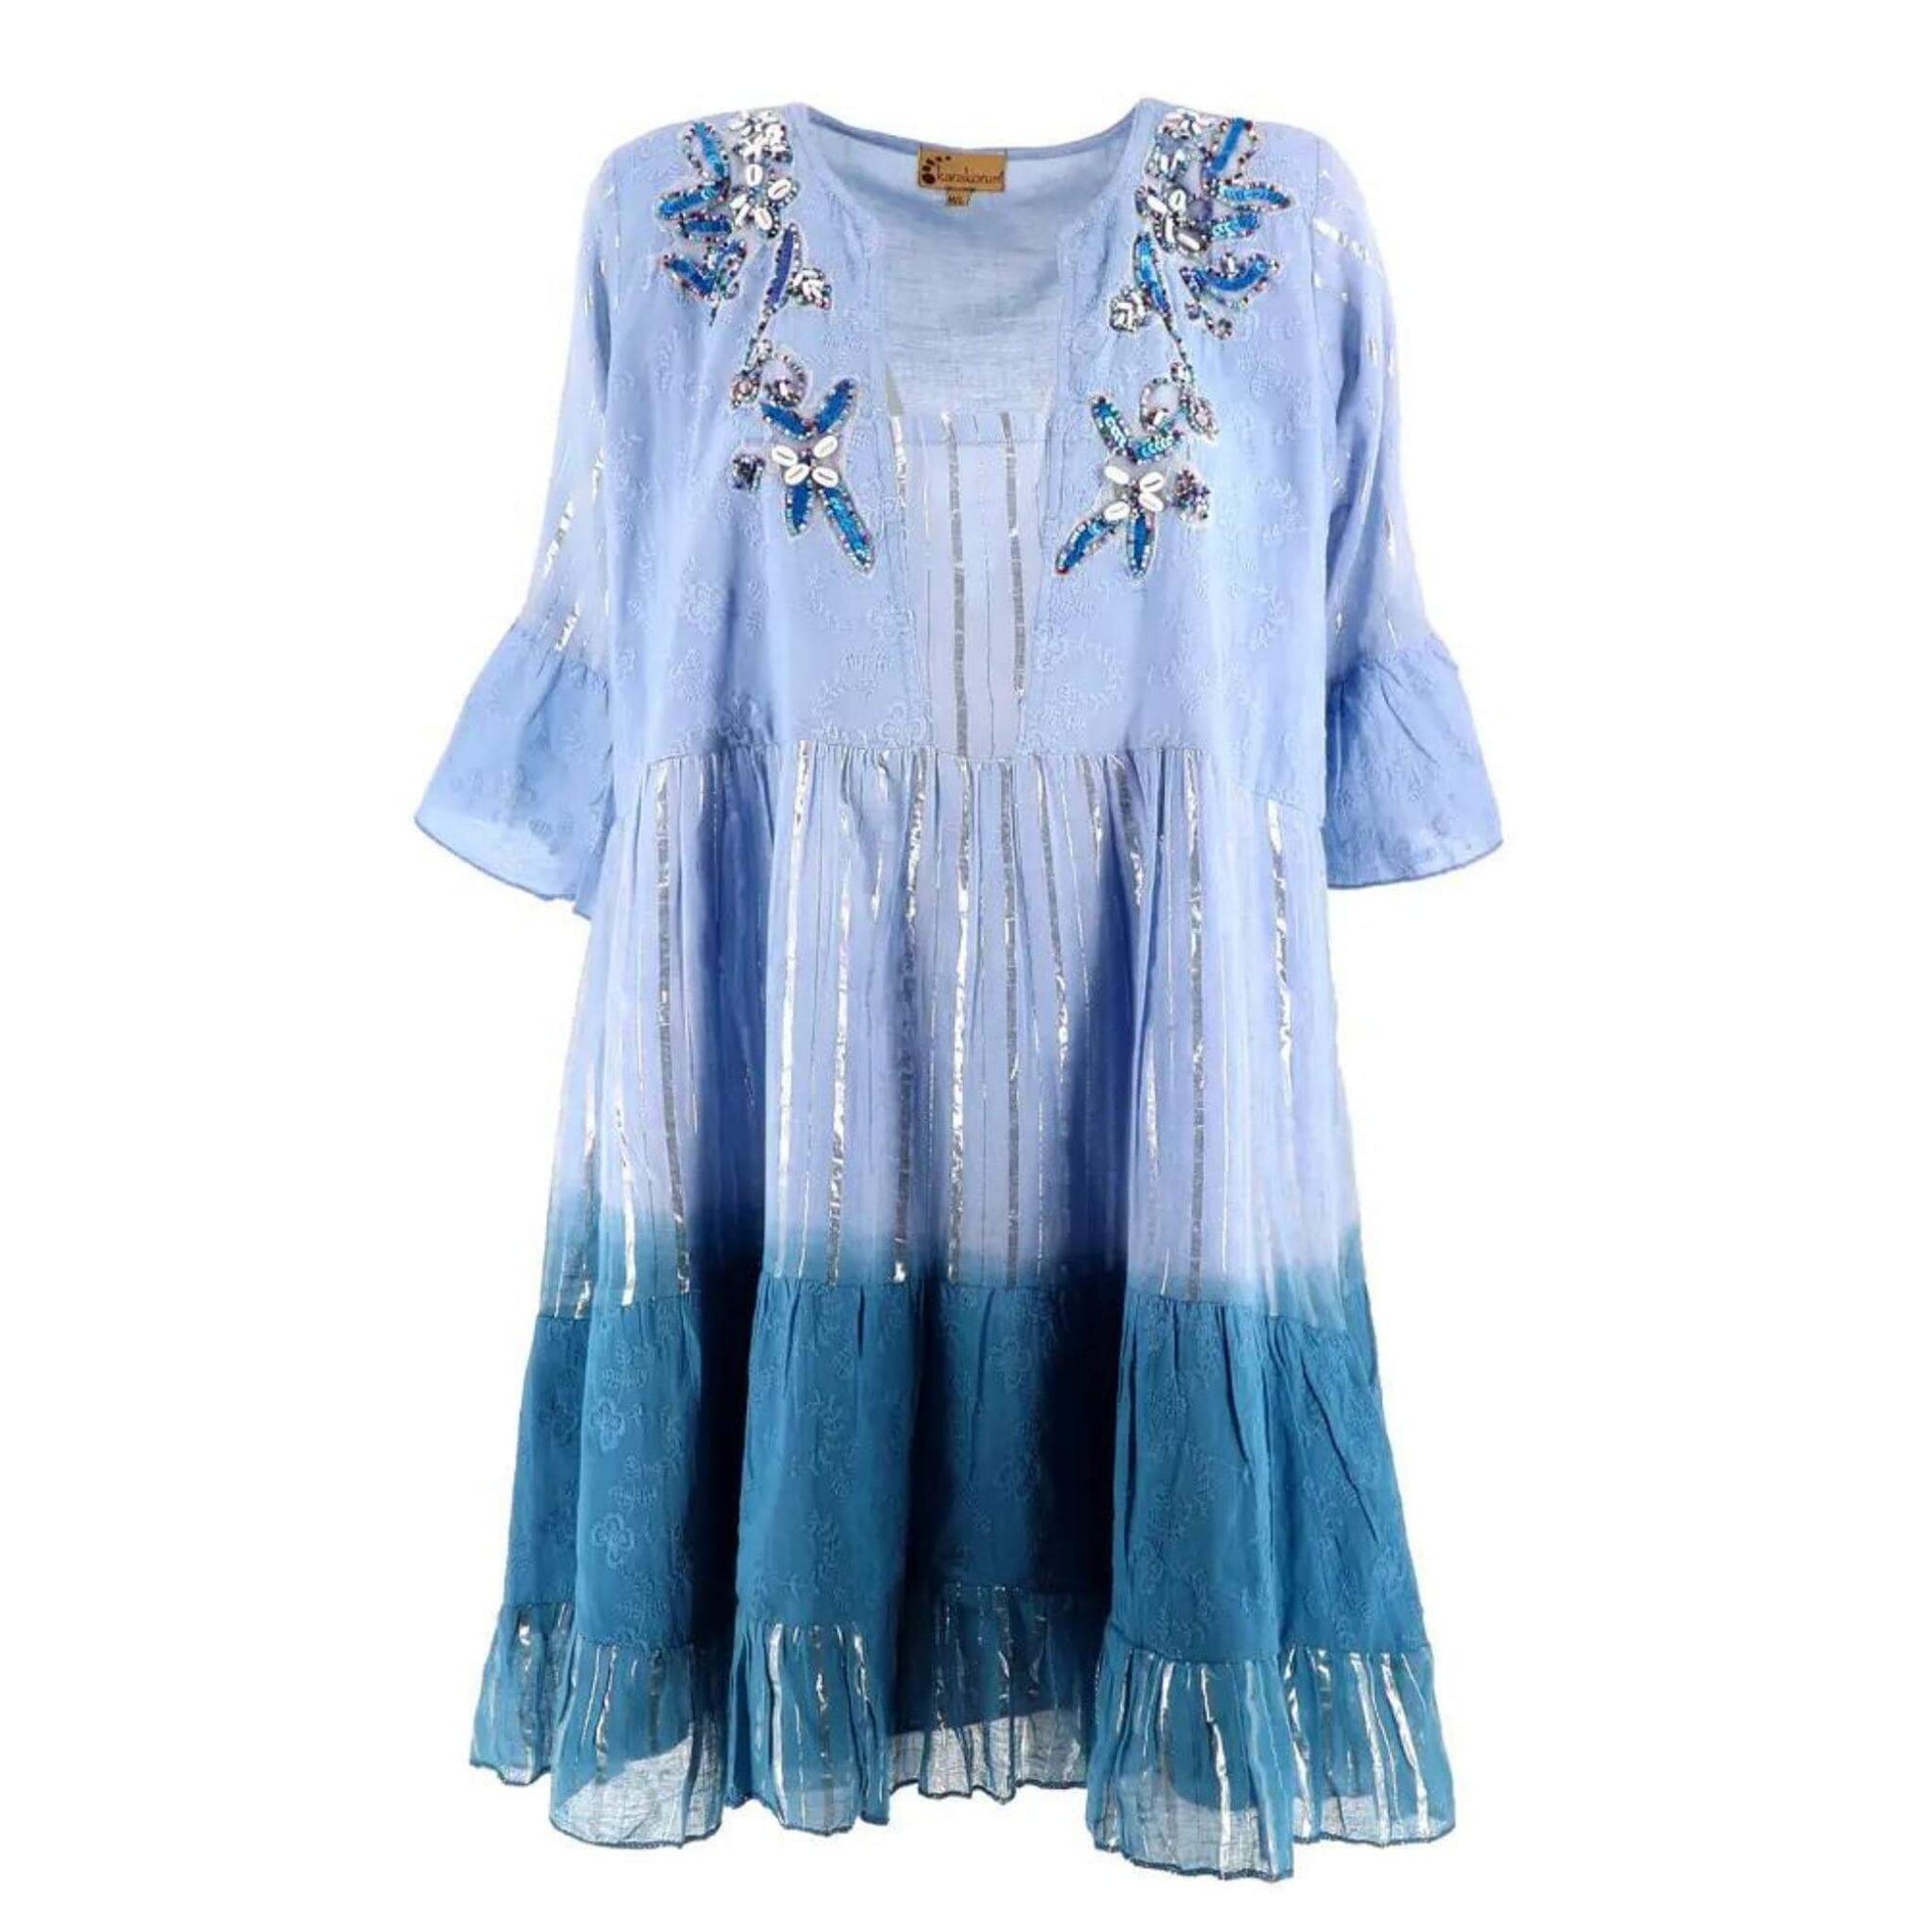 Granada Short Dress embroidered with beads & cowrie shells - Unik by Nature